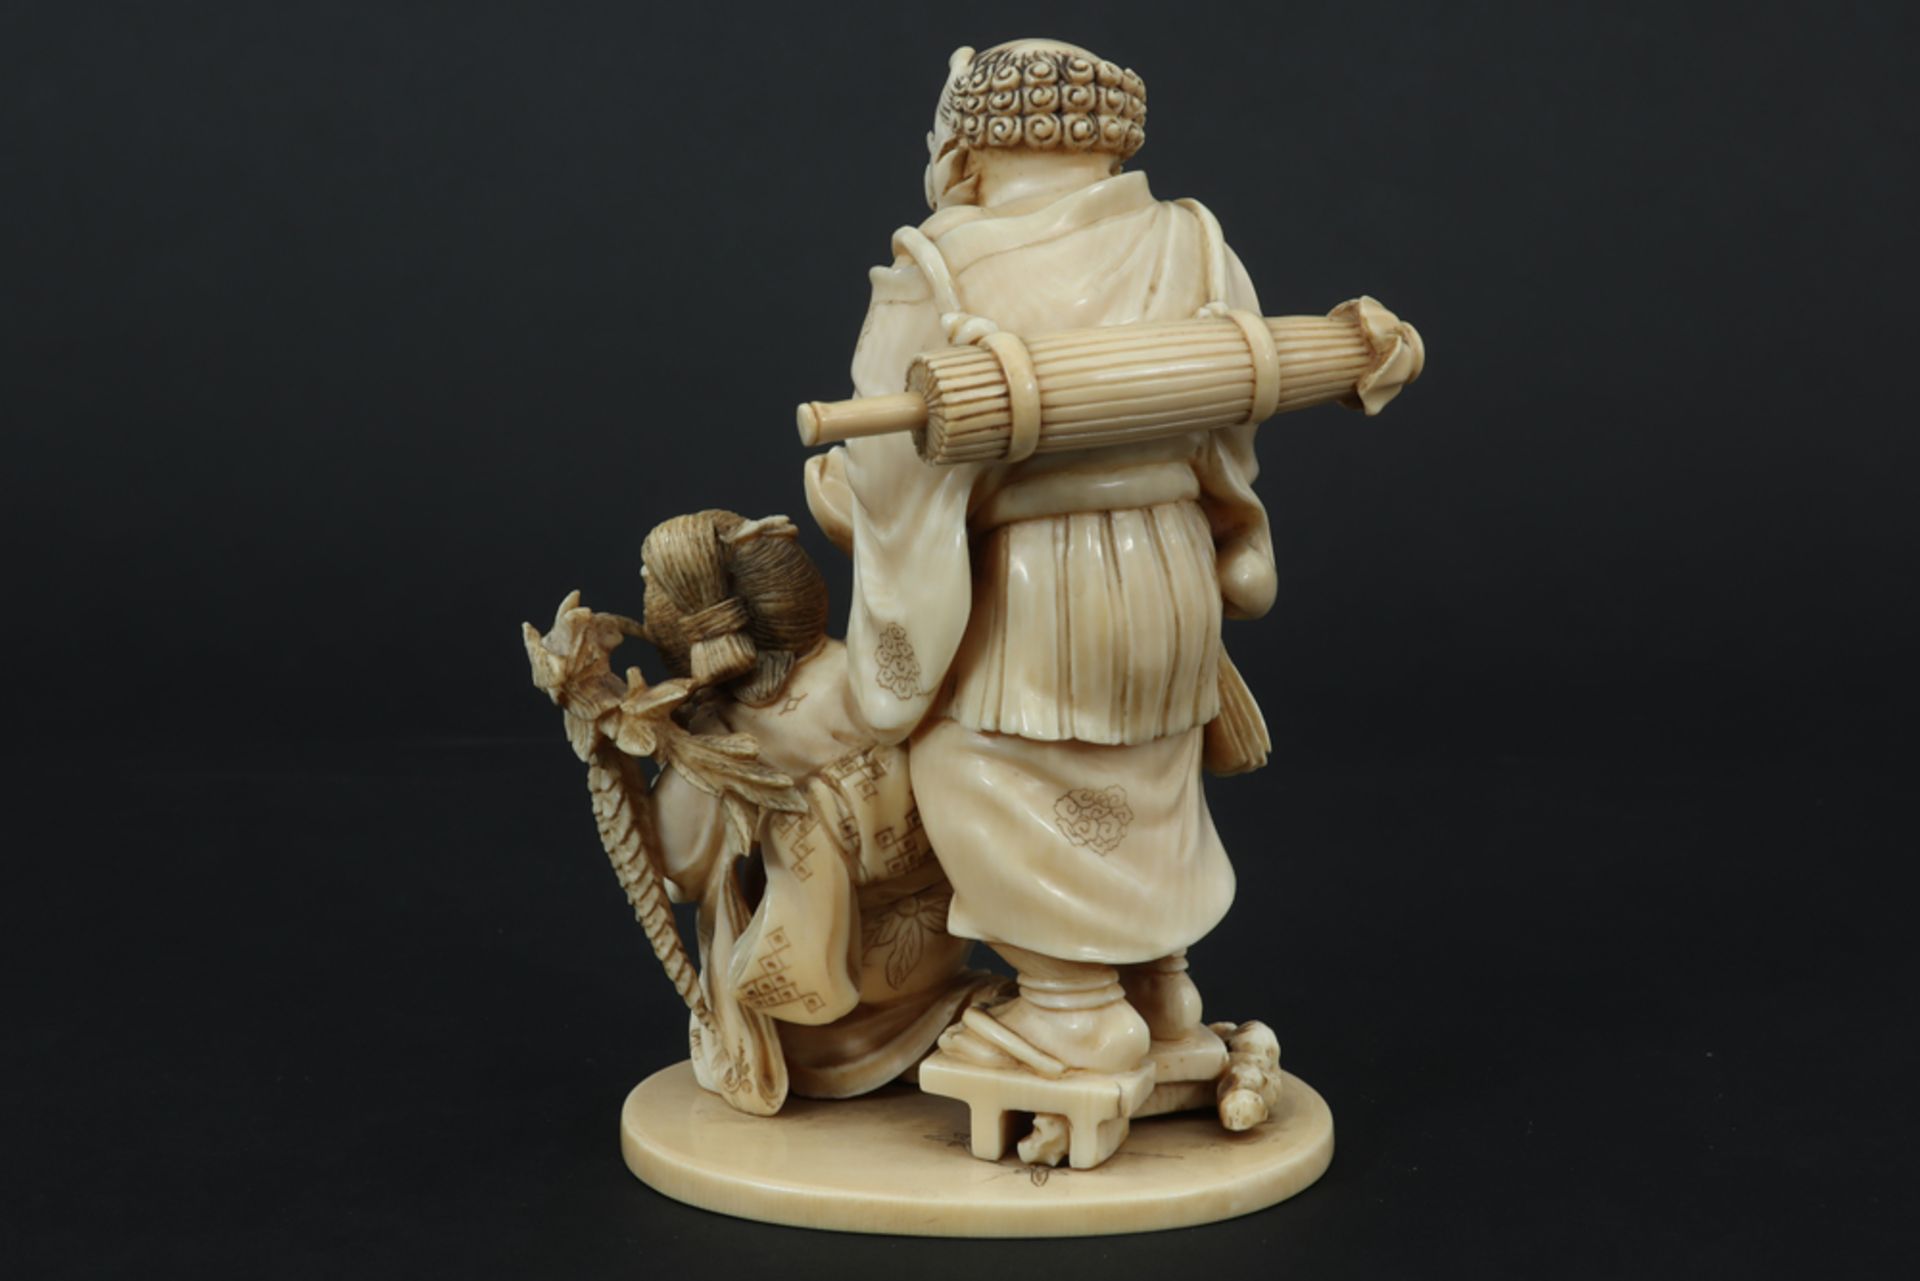 19th Cent. Japanese "Demon and Lady" sculpture in marked ivory - with EU CITES certification || - Image 3 of 5